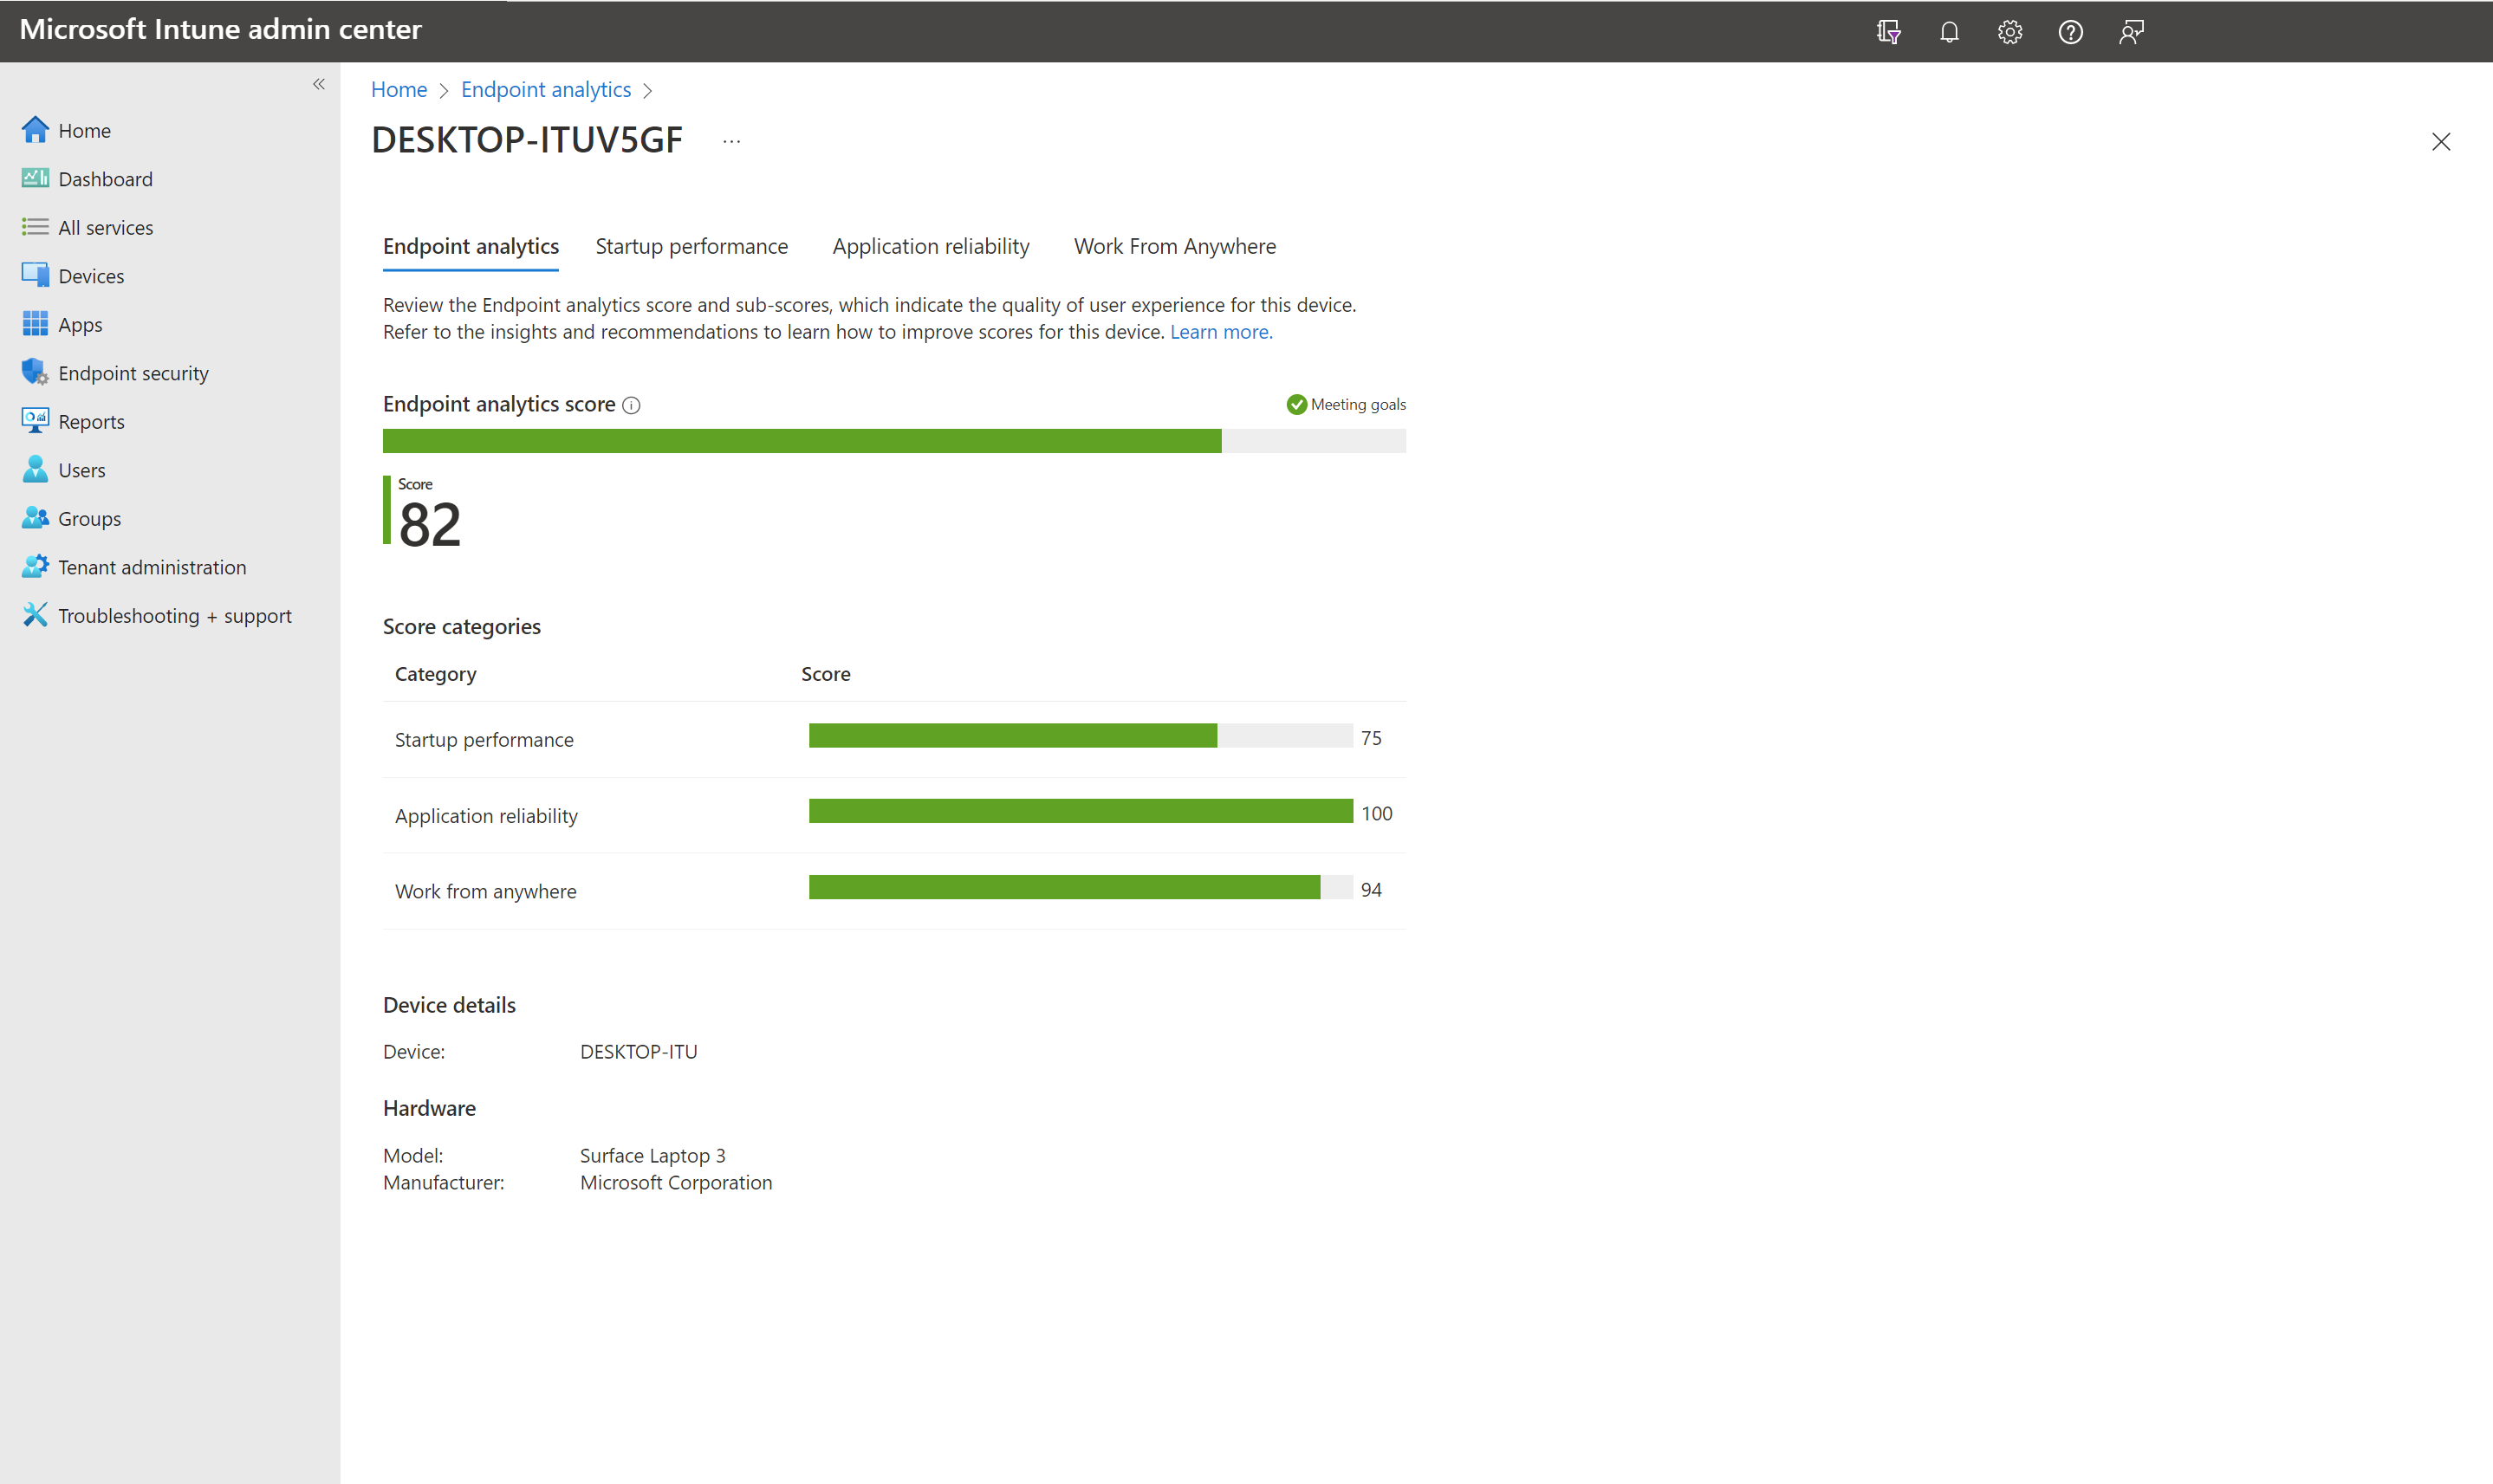 Screenshot of a device's Endpoint analytics score with the startup performance and application reliability subscores.